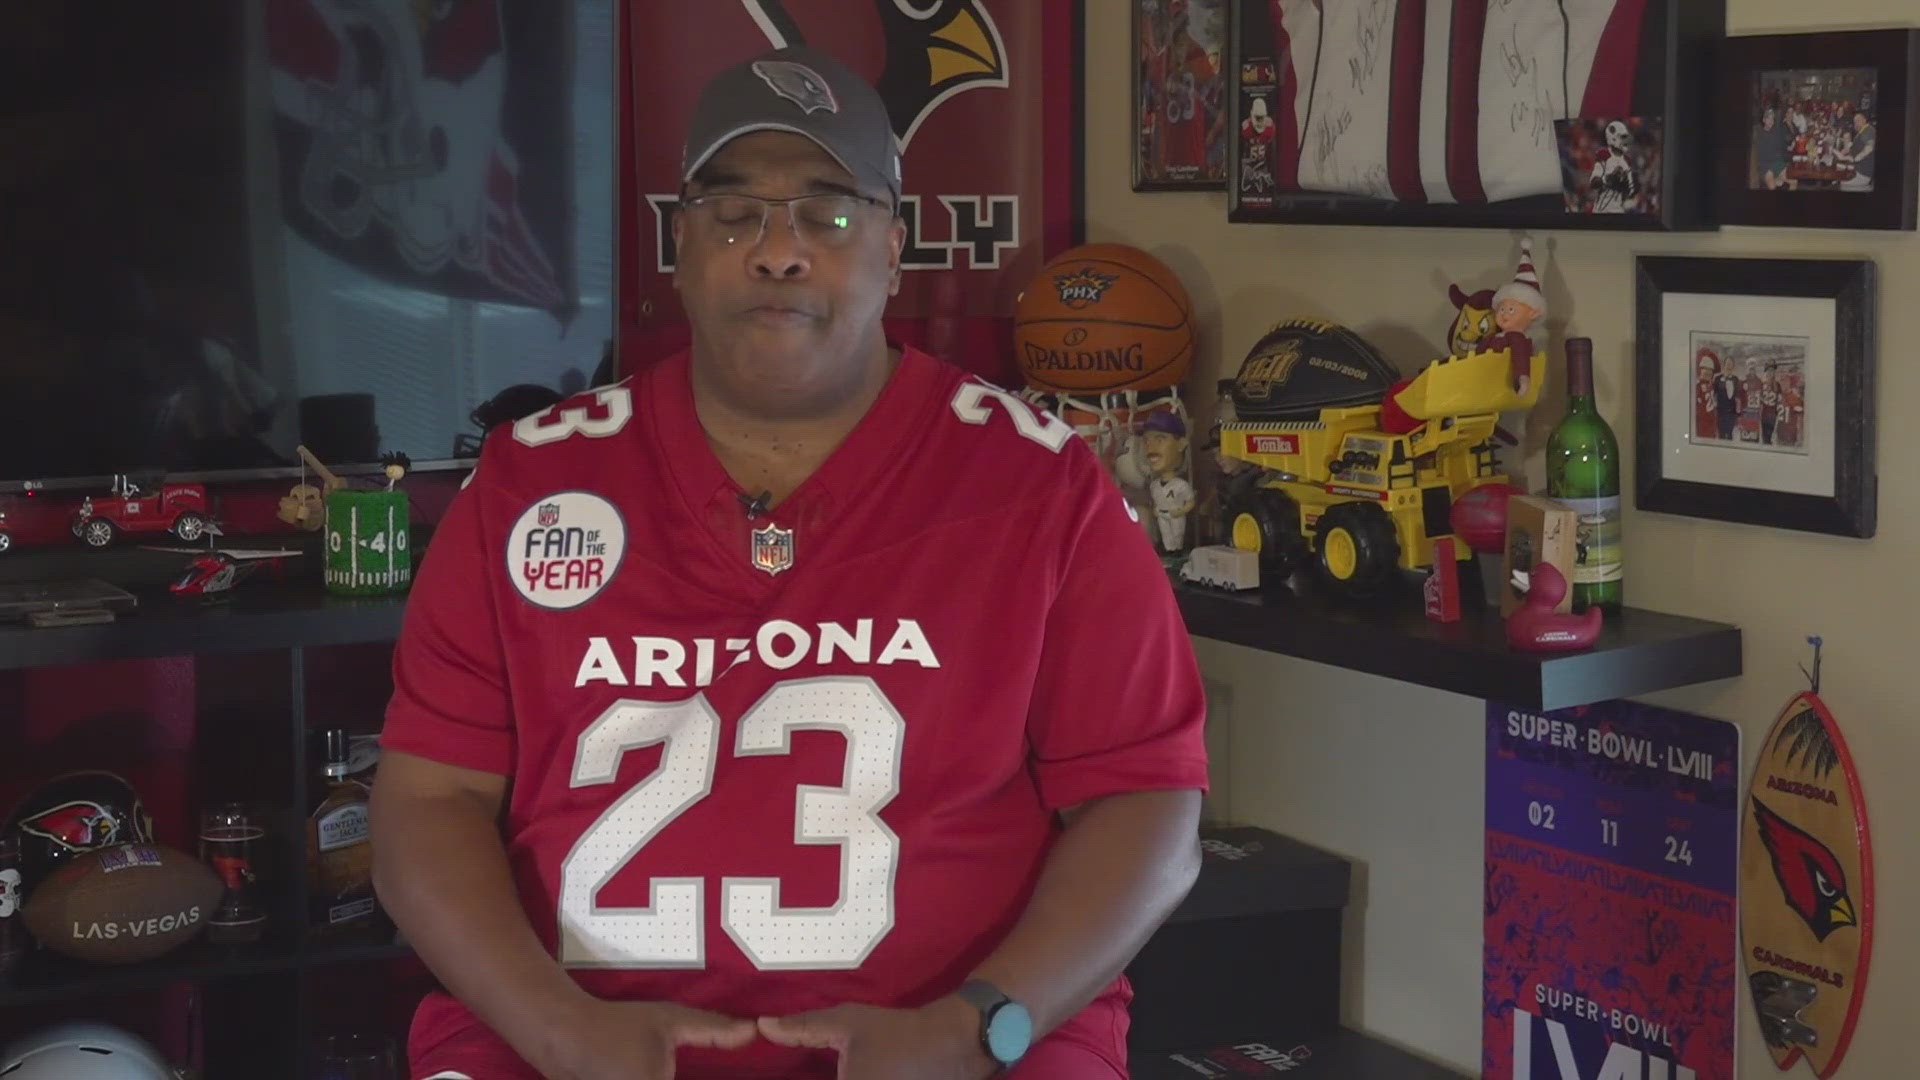 The Arizona Cardinals are ready for the 2024 NFL Draft and fans are excited to see who the team selects for their first-round picks.